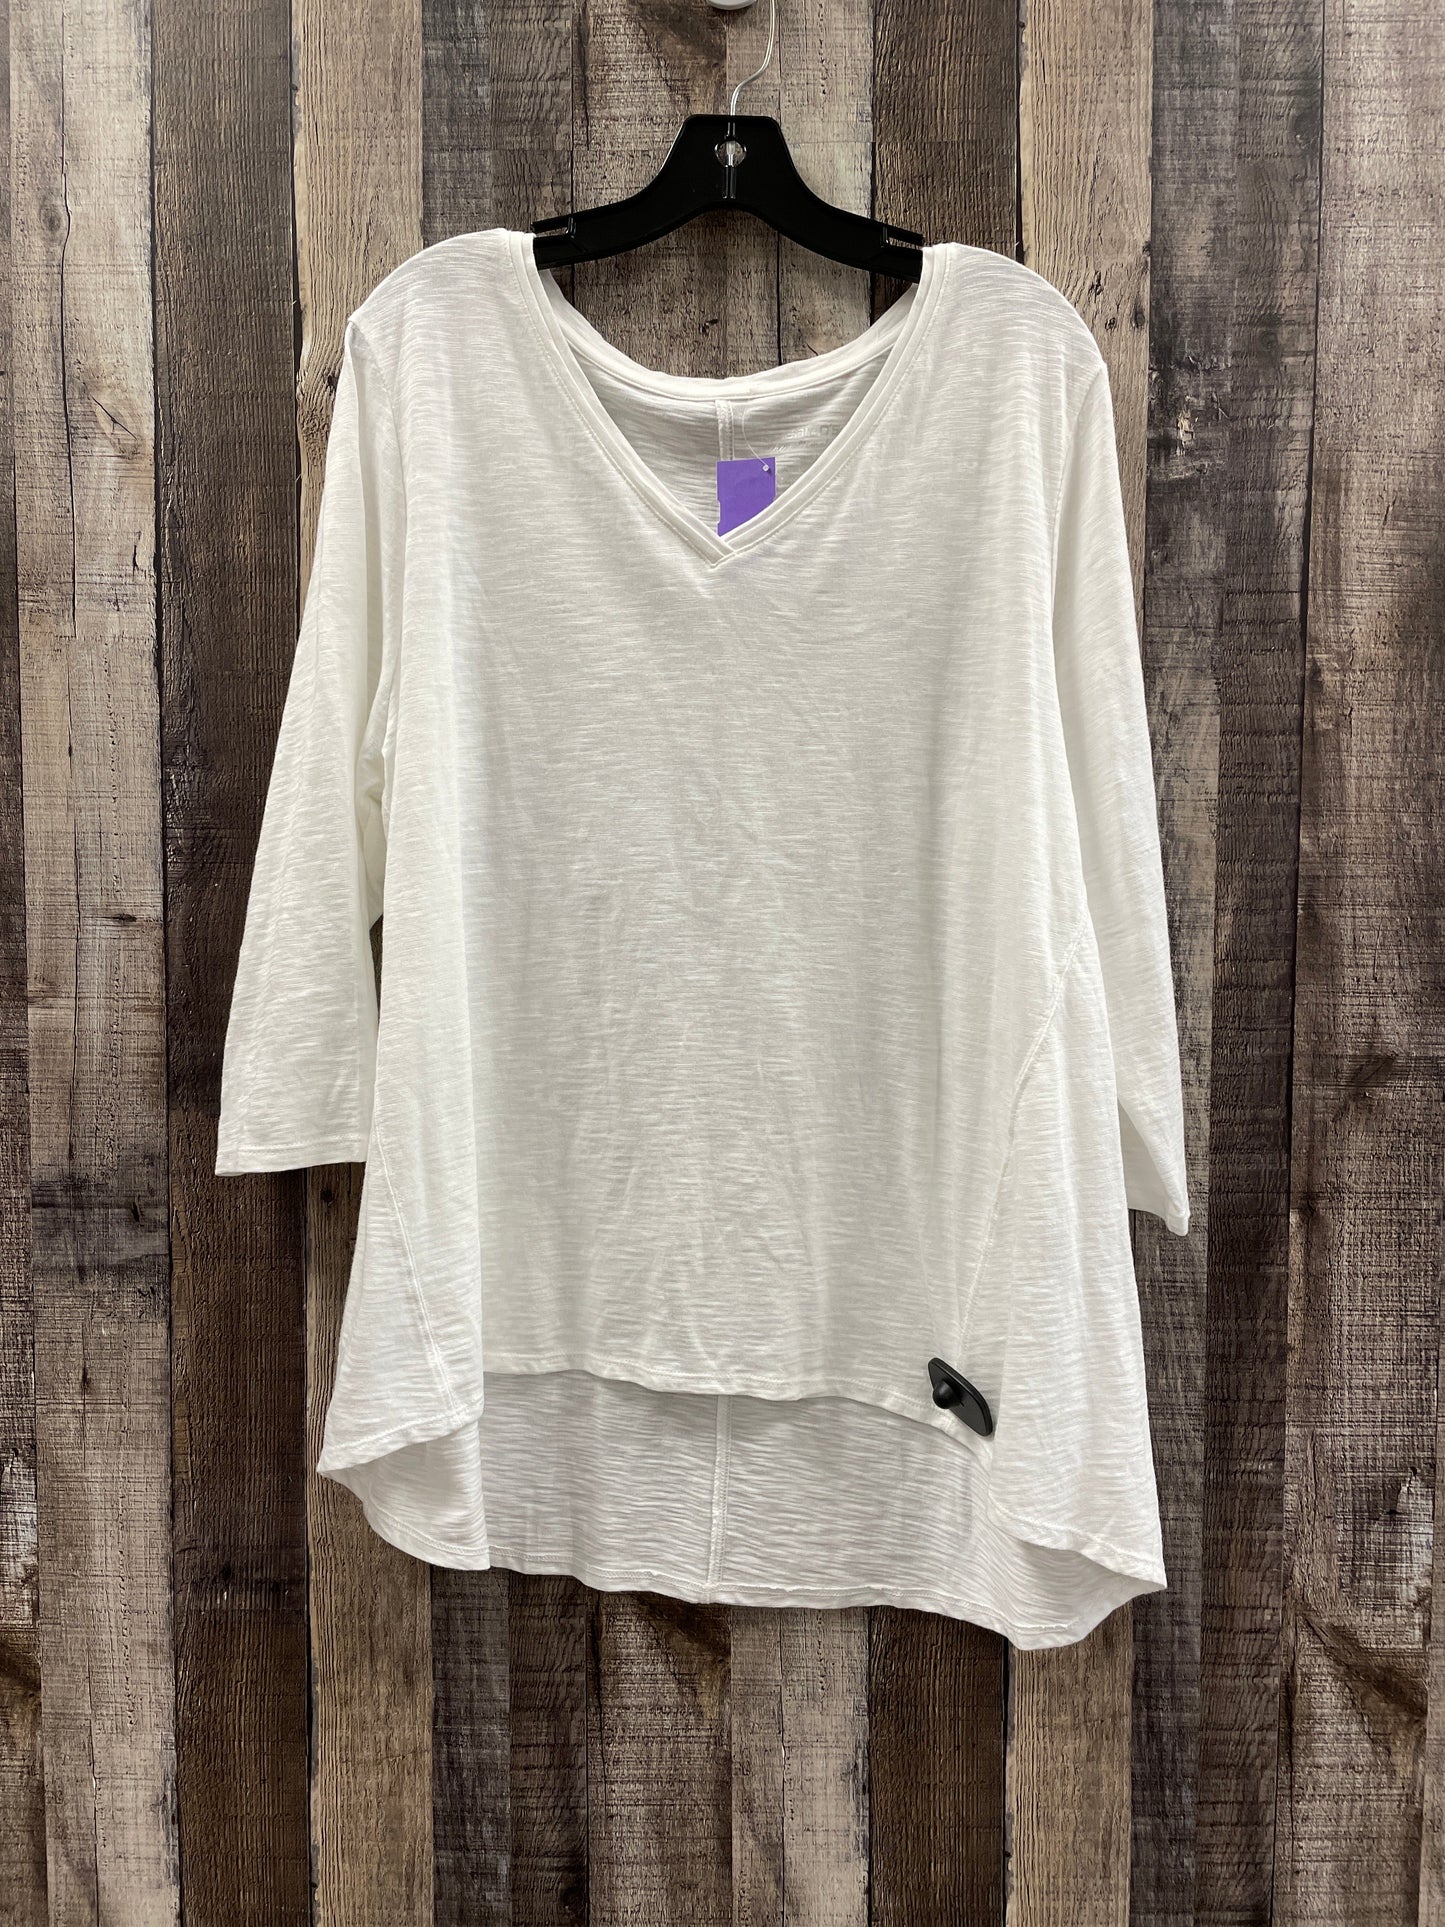 White Top 3/4 Sleeve Chicos, Size Xl